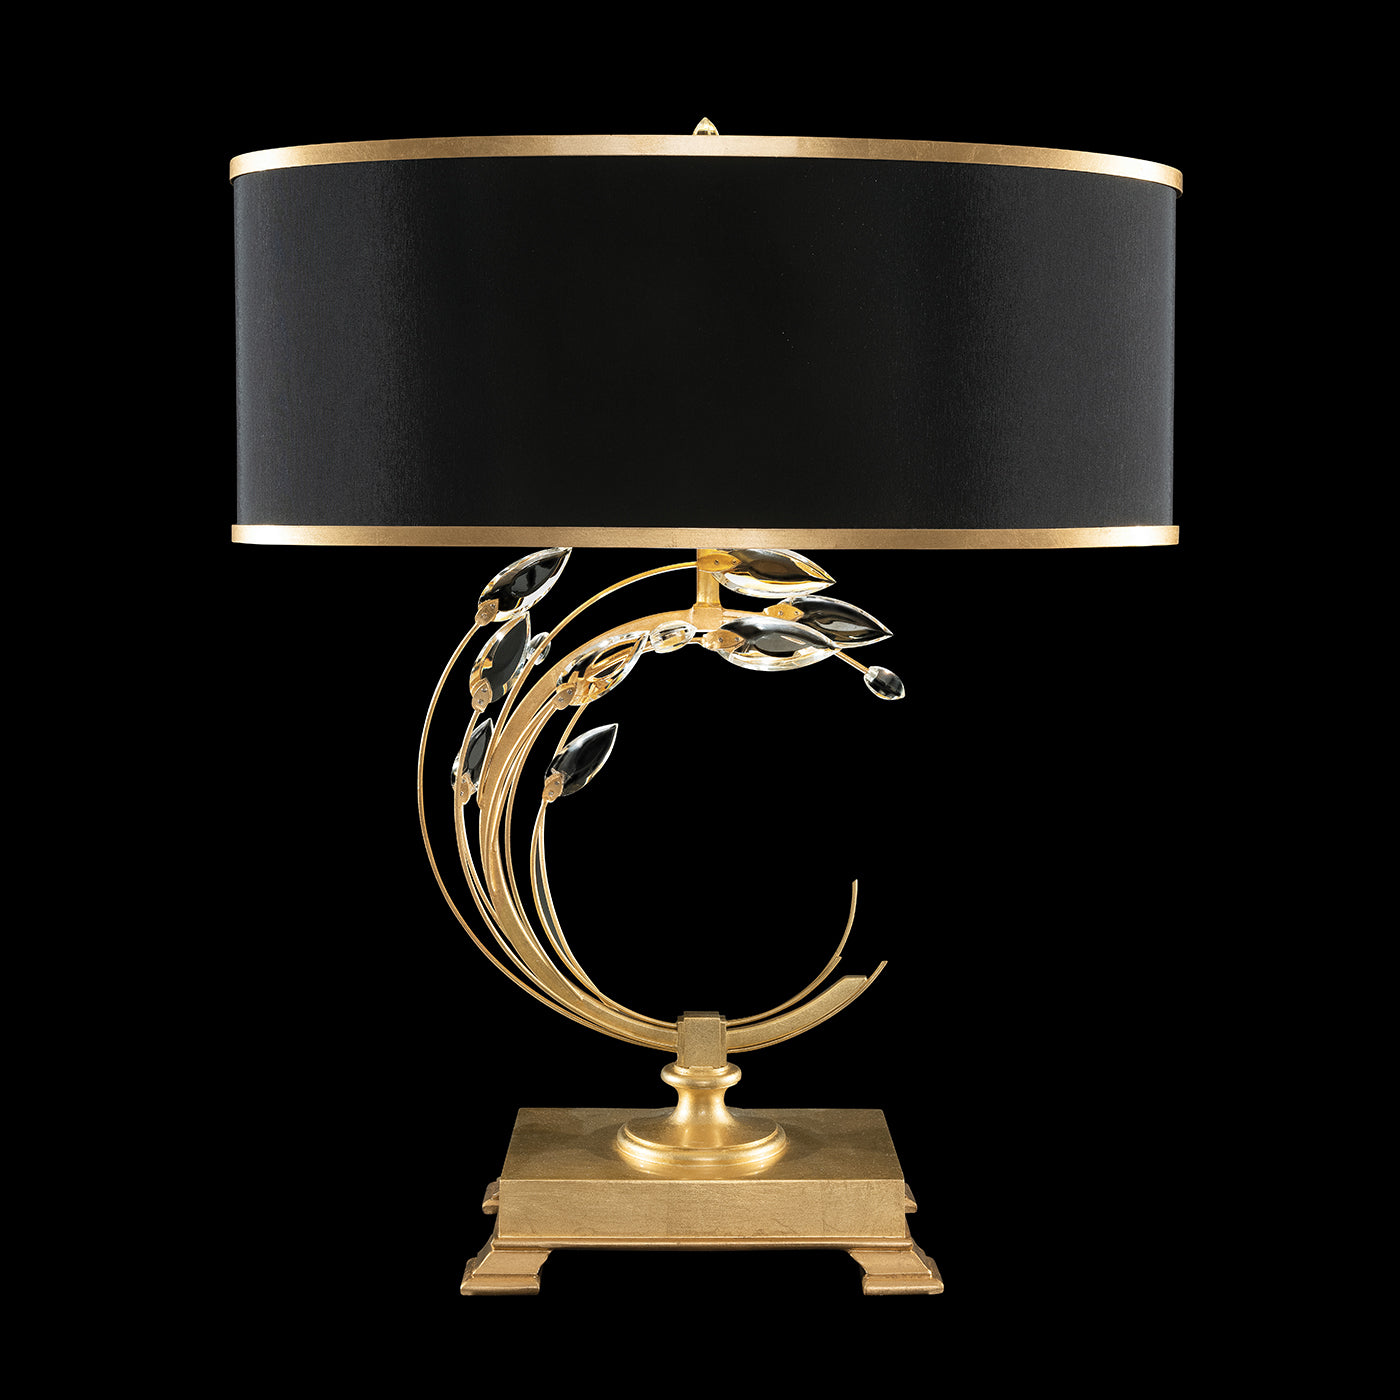 Fine Art Crystal Laurel 31" Table Lamp Lamp Fine Art Handcrafted Lighting Gold Leaf with Black Shade Right 